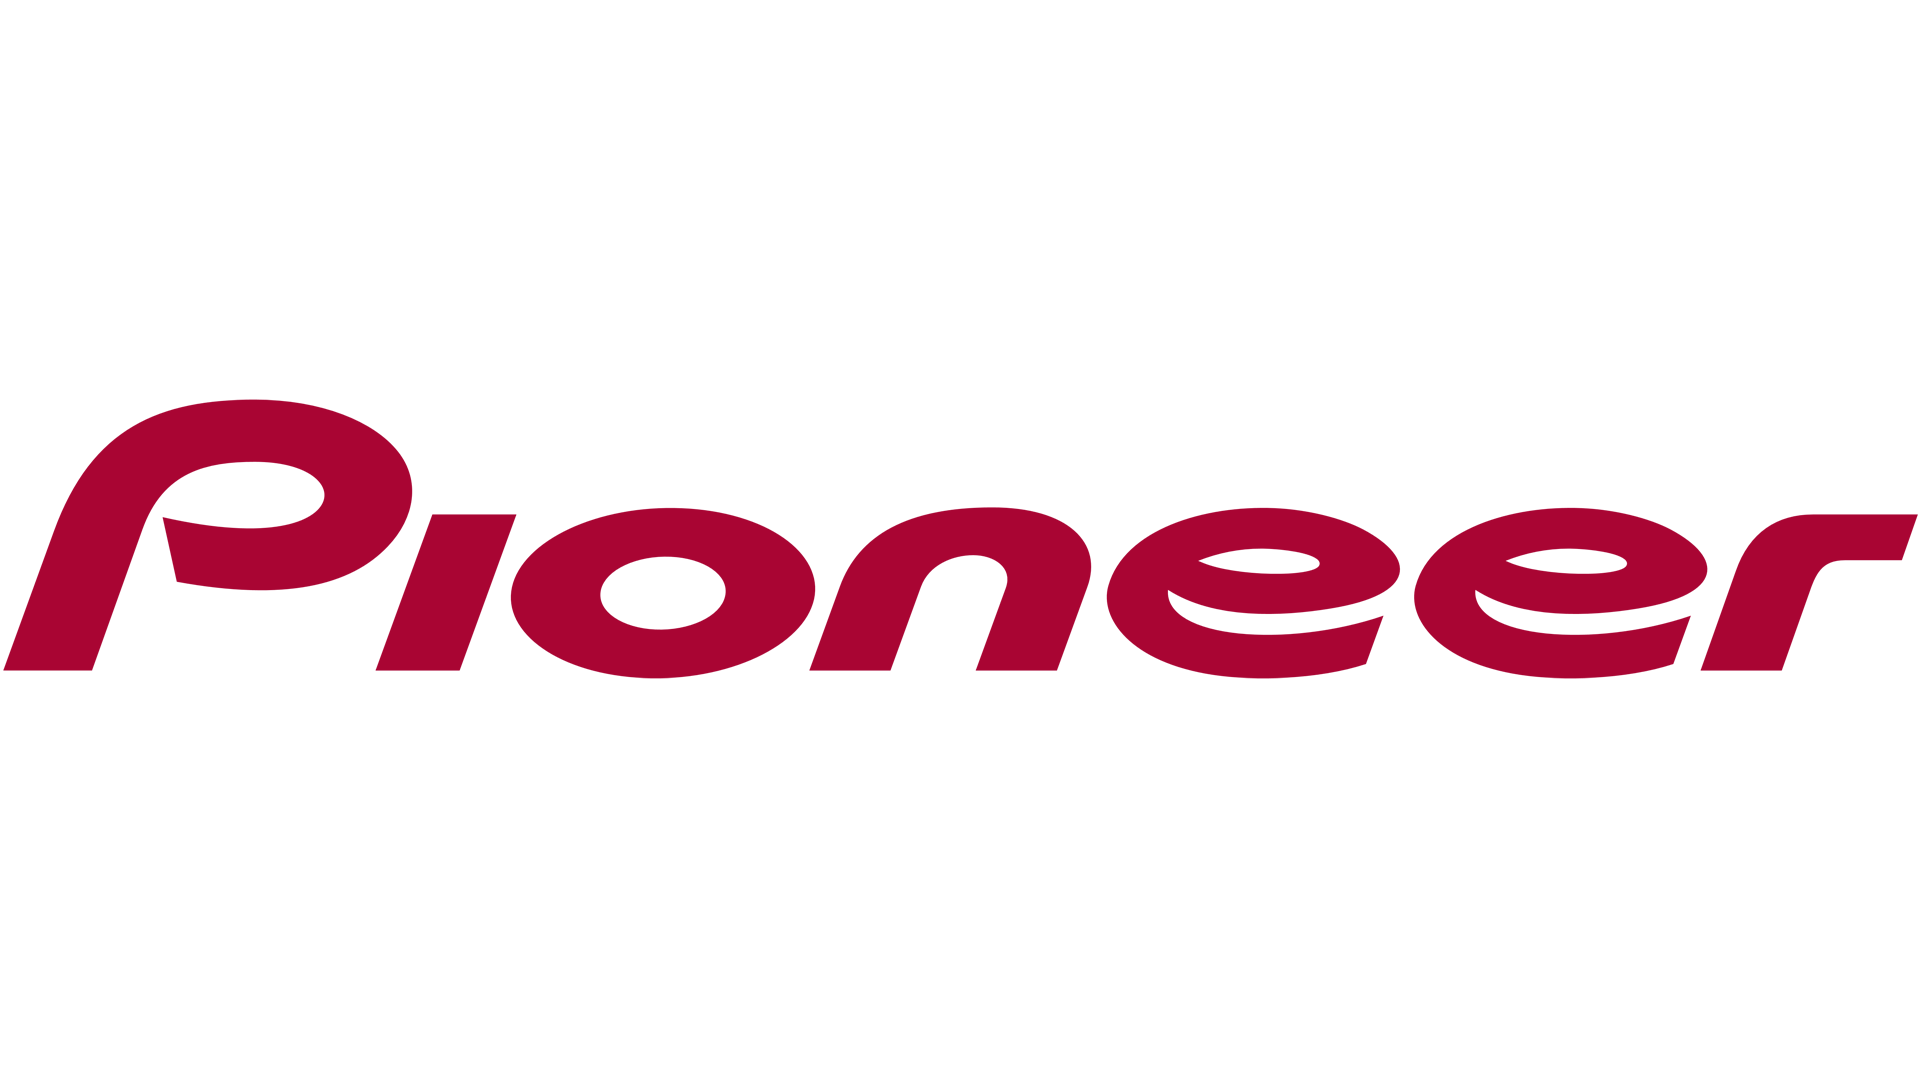 Pioneer Logo - Pioneer Logo, Pioneer Symbol, Meaning, History and Evolution